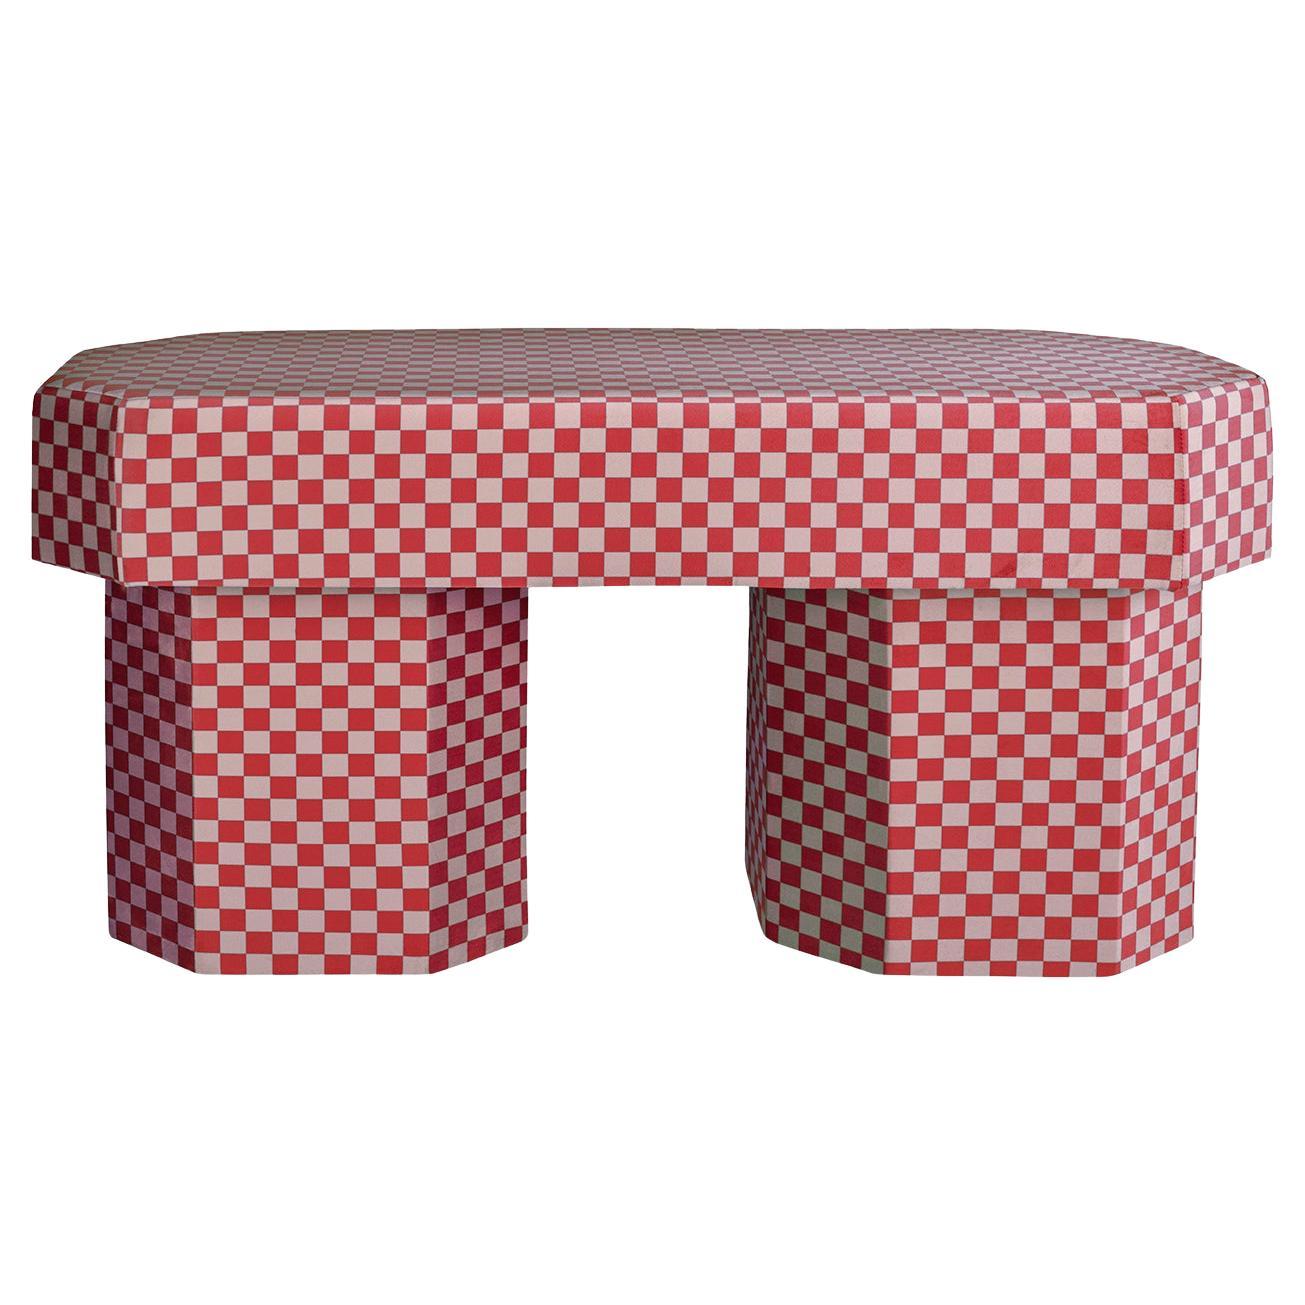 Viva Checkerboard Red and Pink Bench by Houtique